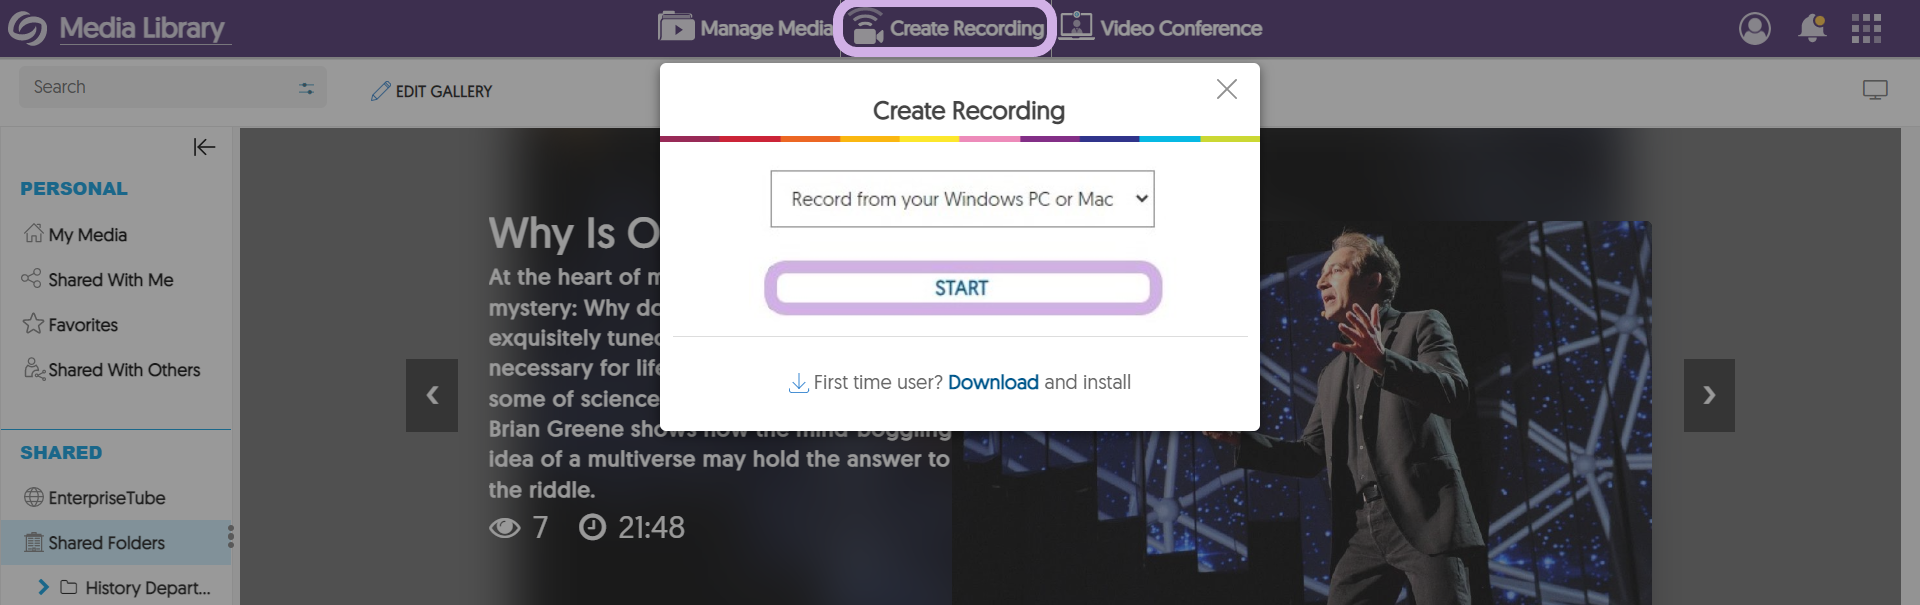 The Video Platform with create Recording located at the top selected. The Create Recording menu is shown.